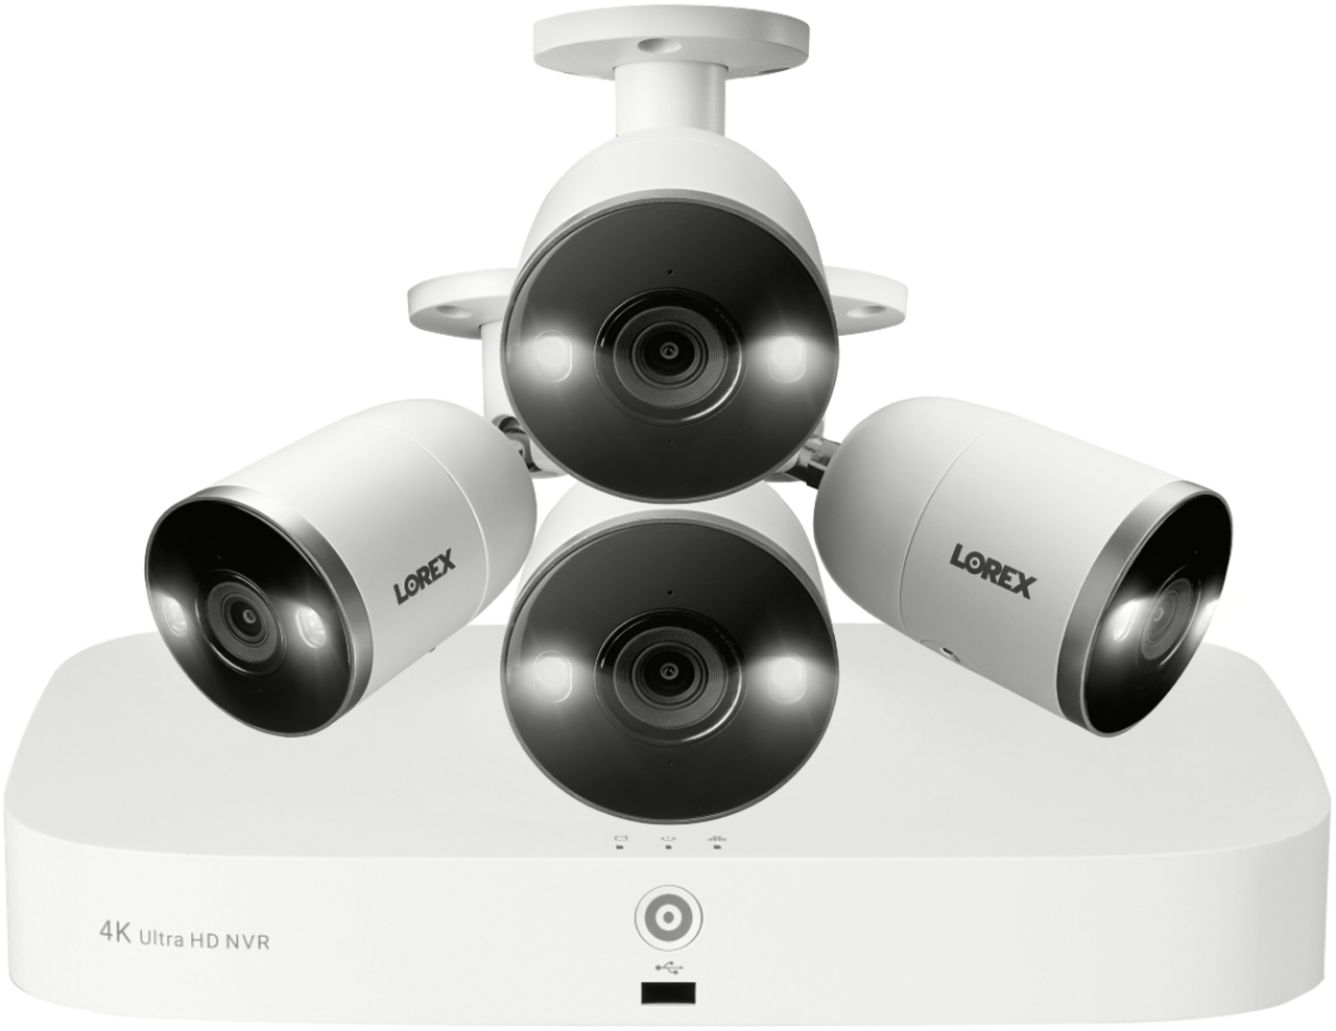 Lorex - 4K NVR Security System with 4 Smart Deterrence Cameras, Fusion Capabilities and Smart Motion Detection Plus - White